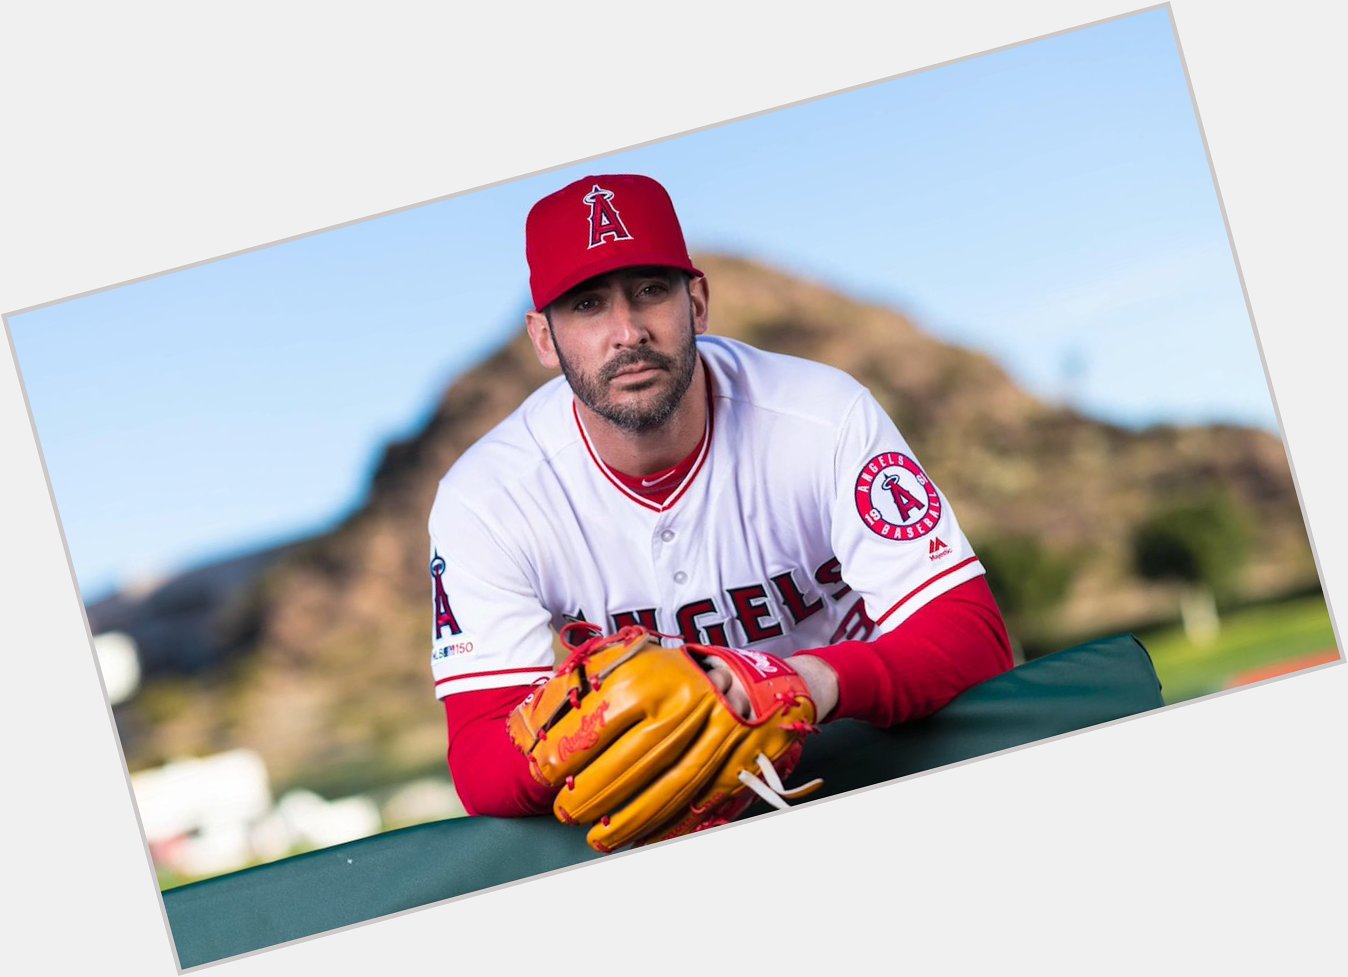 Happy birthday to Matt Harvey... the one time Dark Knight trying to revive his career with the Angels 